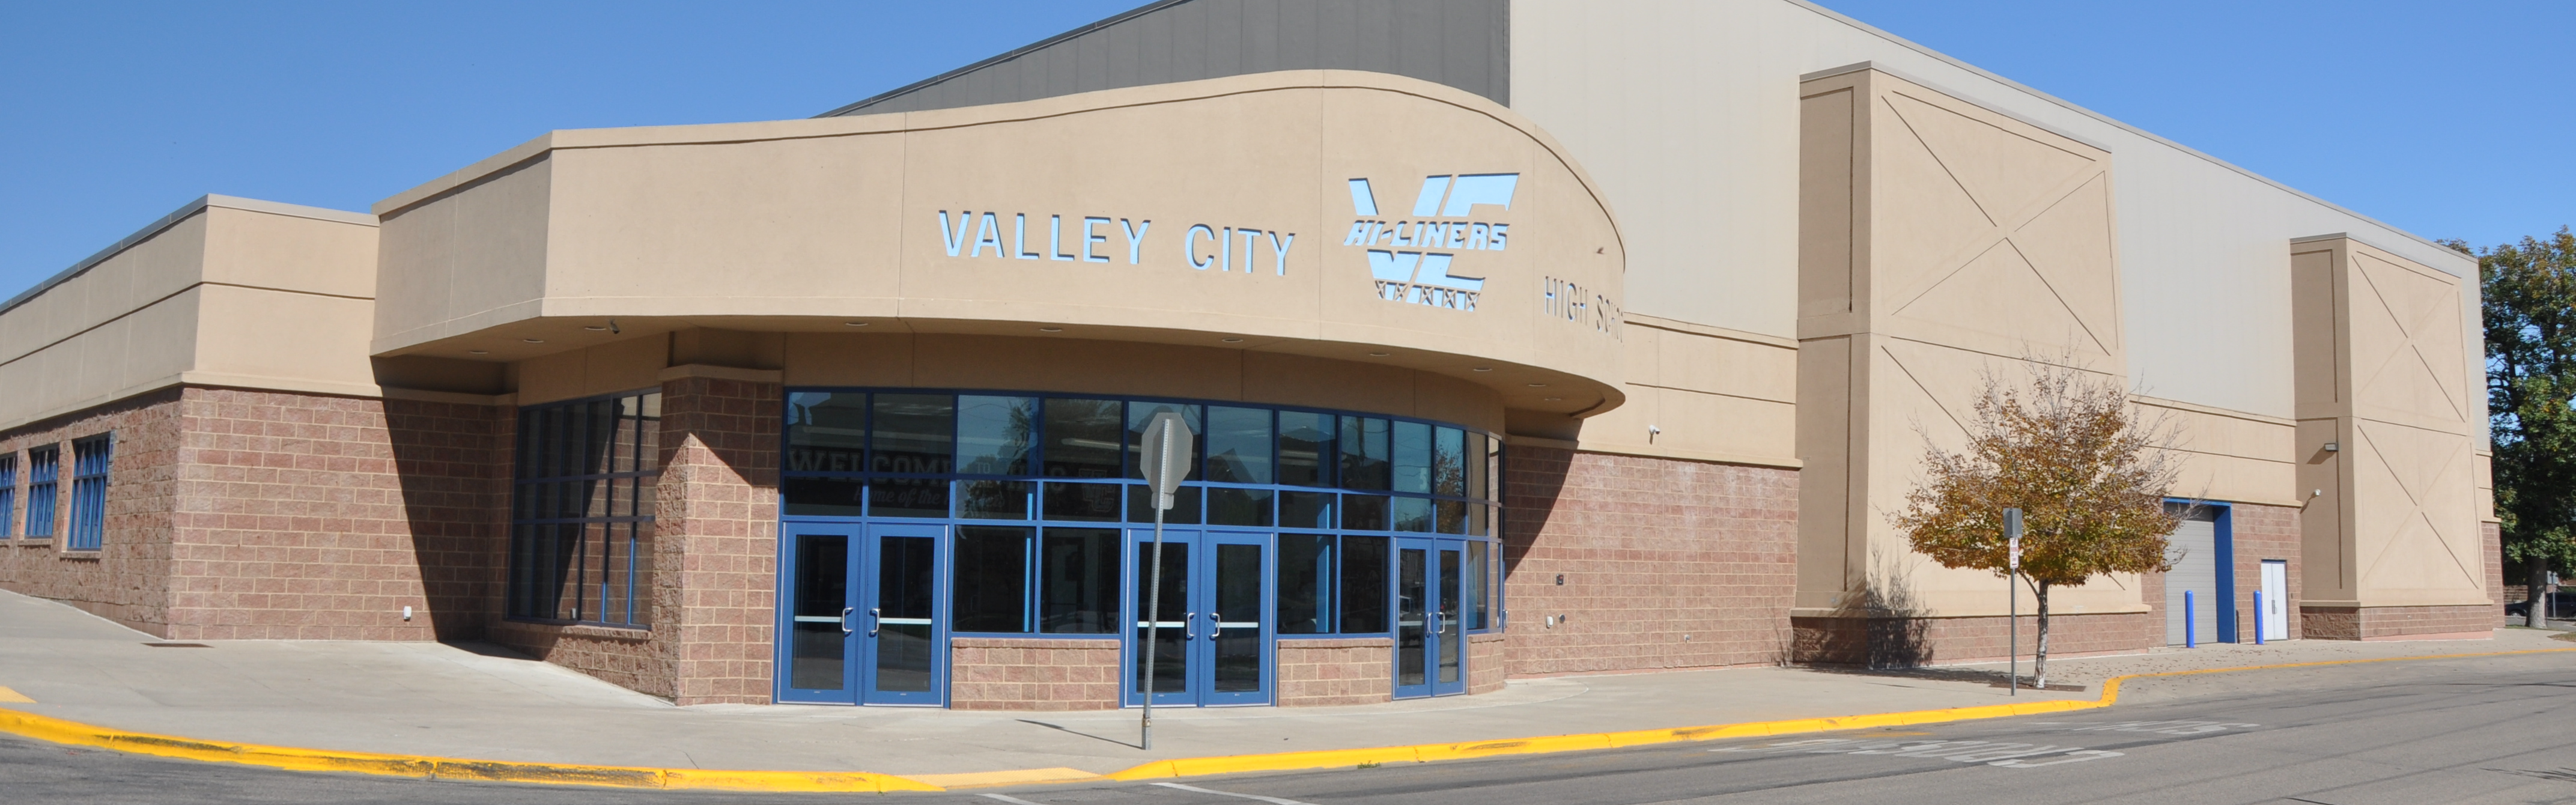 Valley City Hi-Liners Activity Center Entrance Photo